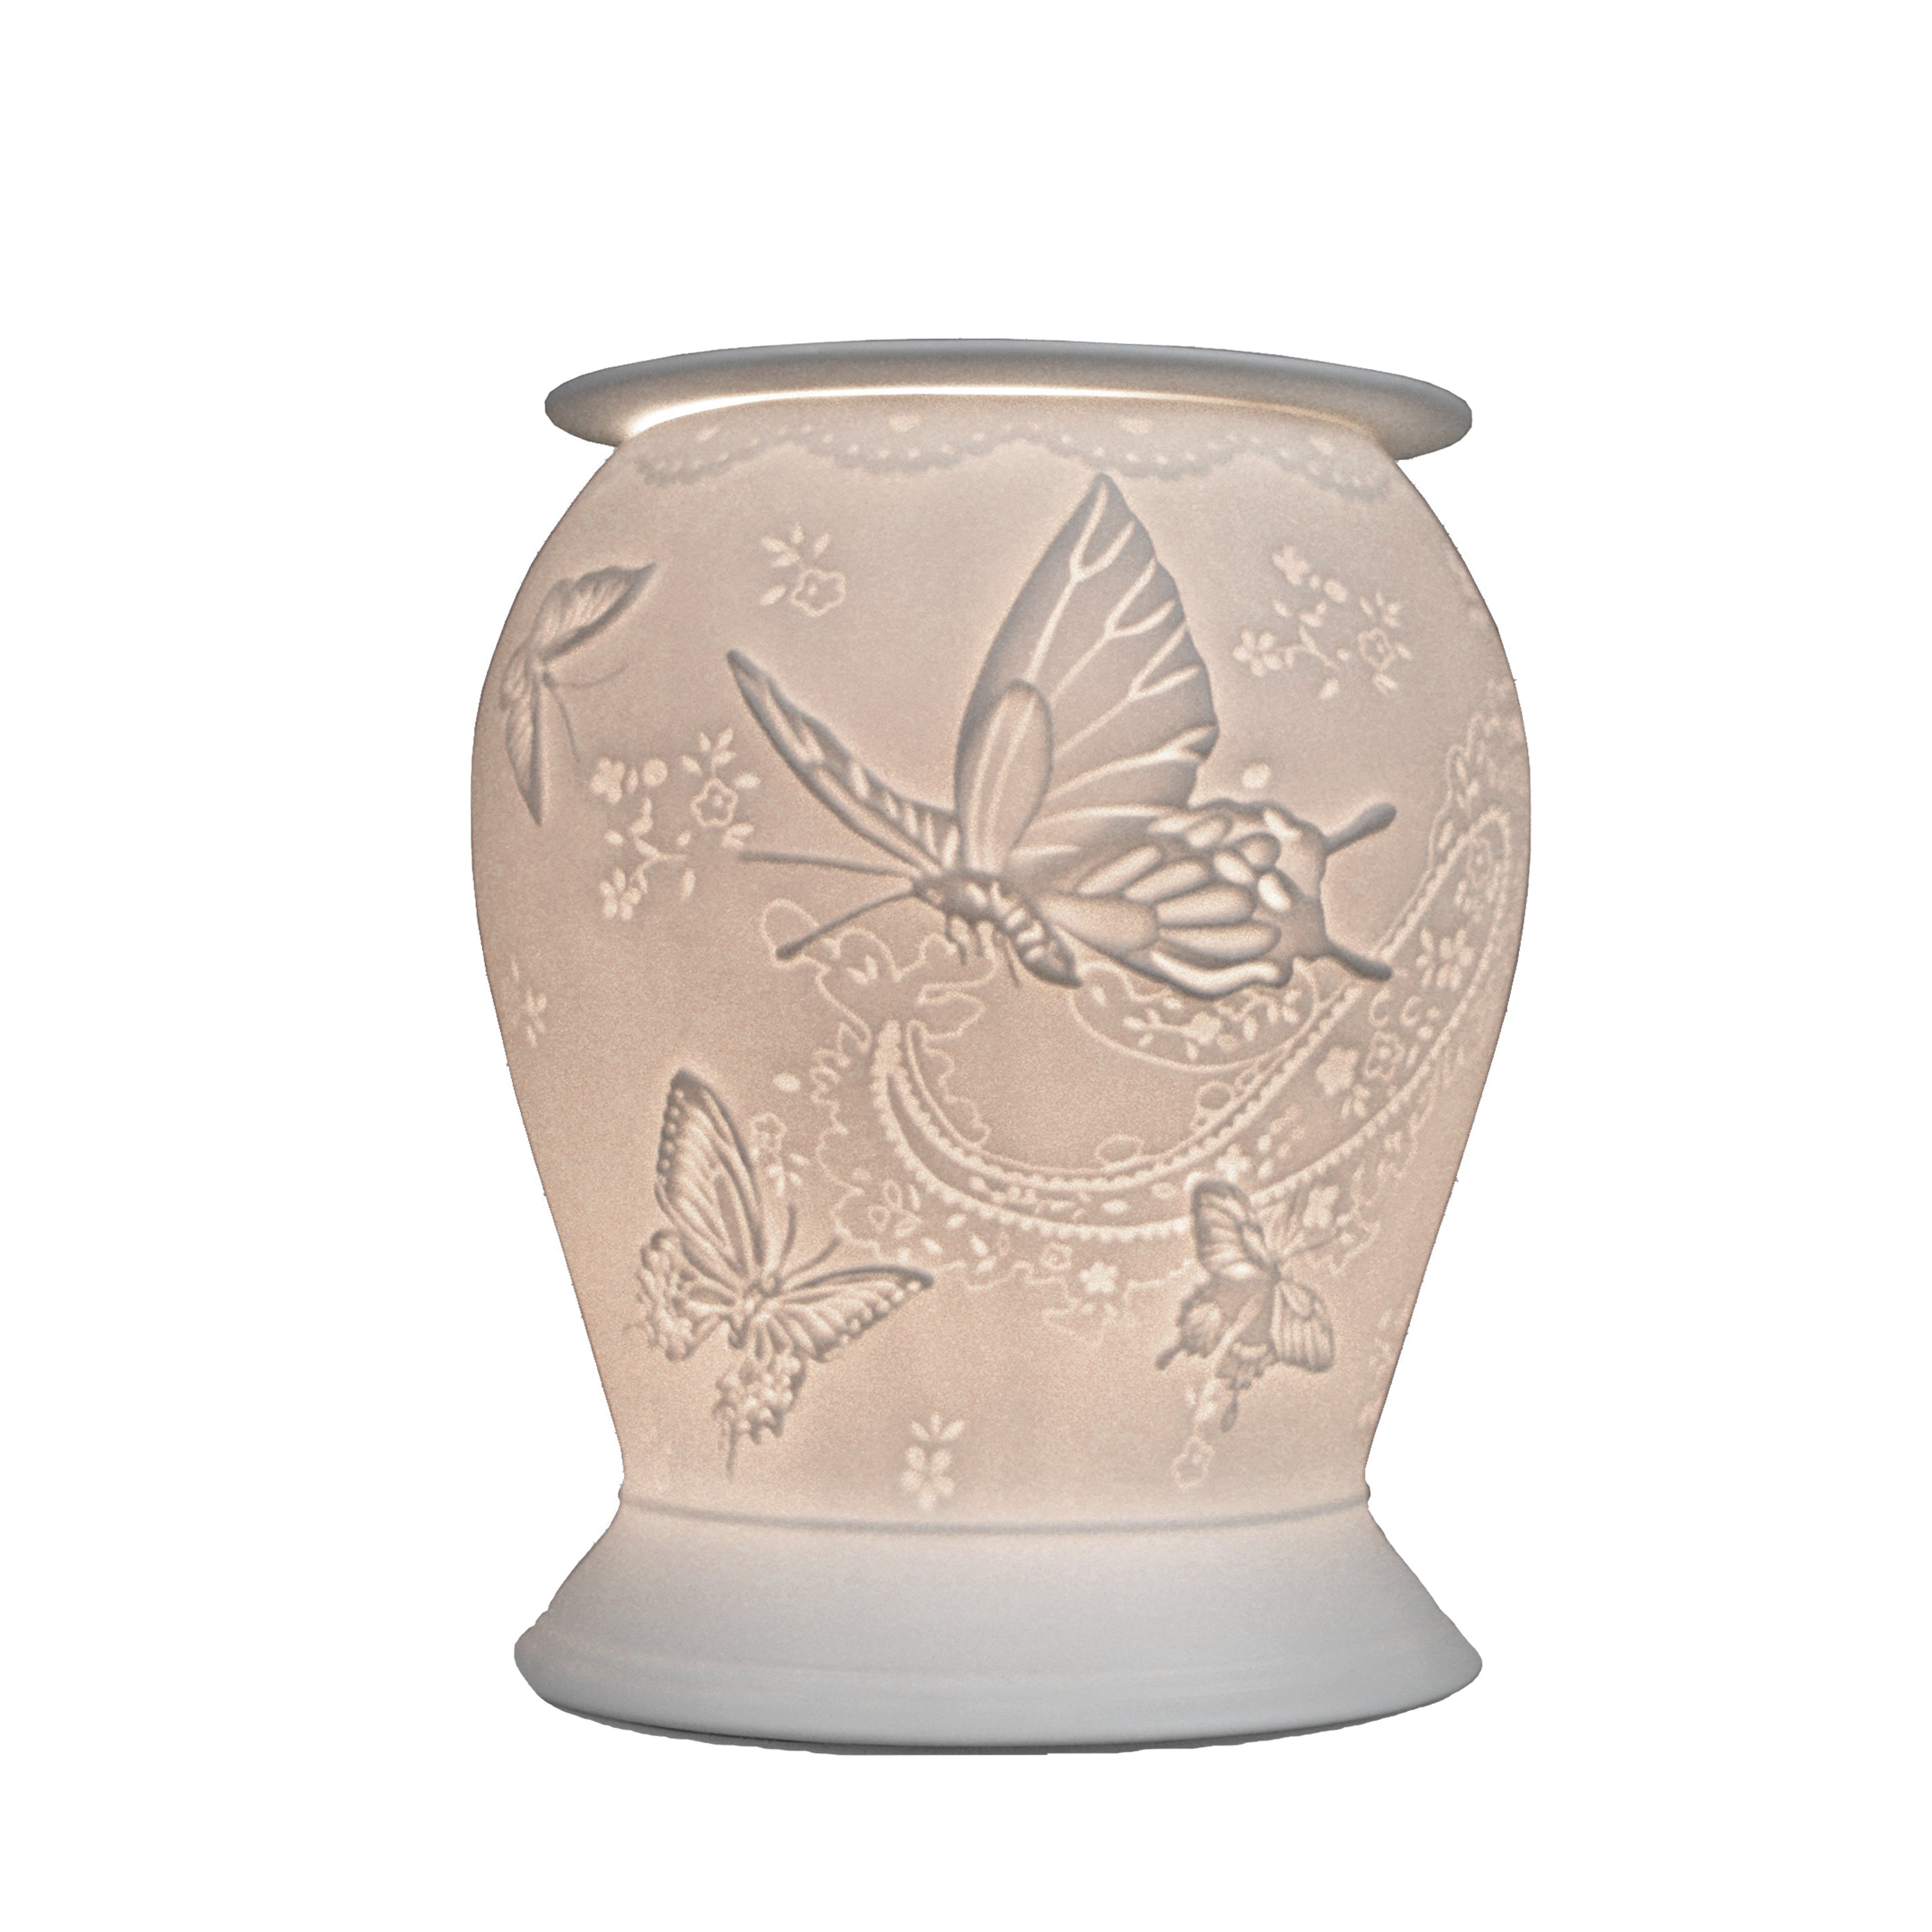 The porcelain material on this Wax Melt Burner allows bright light to shine through it, providing the opportunity to create this gorgeous Butterfly design. This is done by crafting images out of thicker and thinner sections of the porcelain, allowing for detailed shadowing and a 3D effect. The porcelains elegant look will fit perfectly in any room is available in a range of designs and two different shapes.